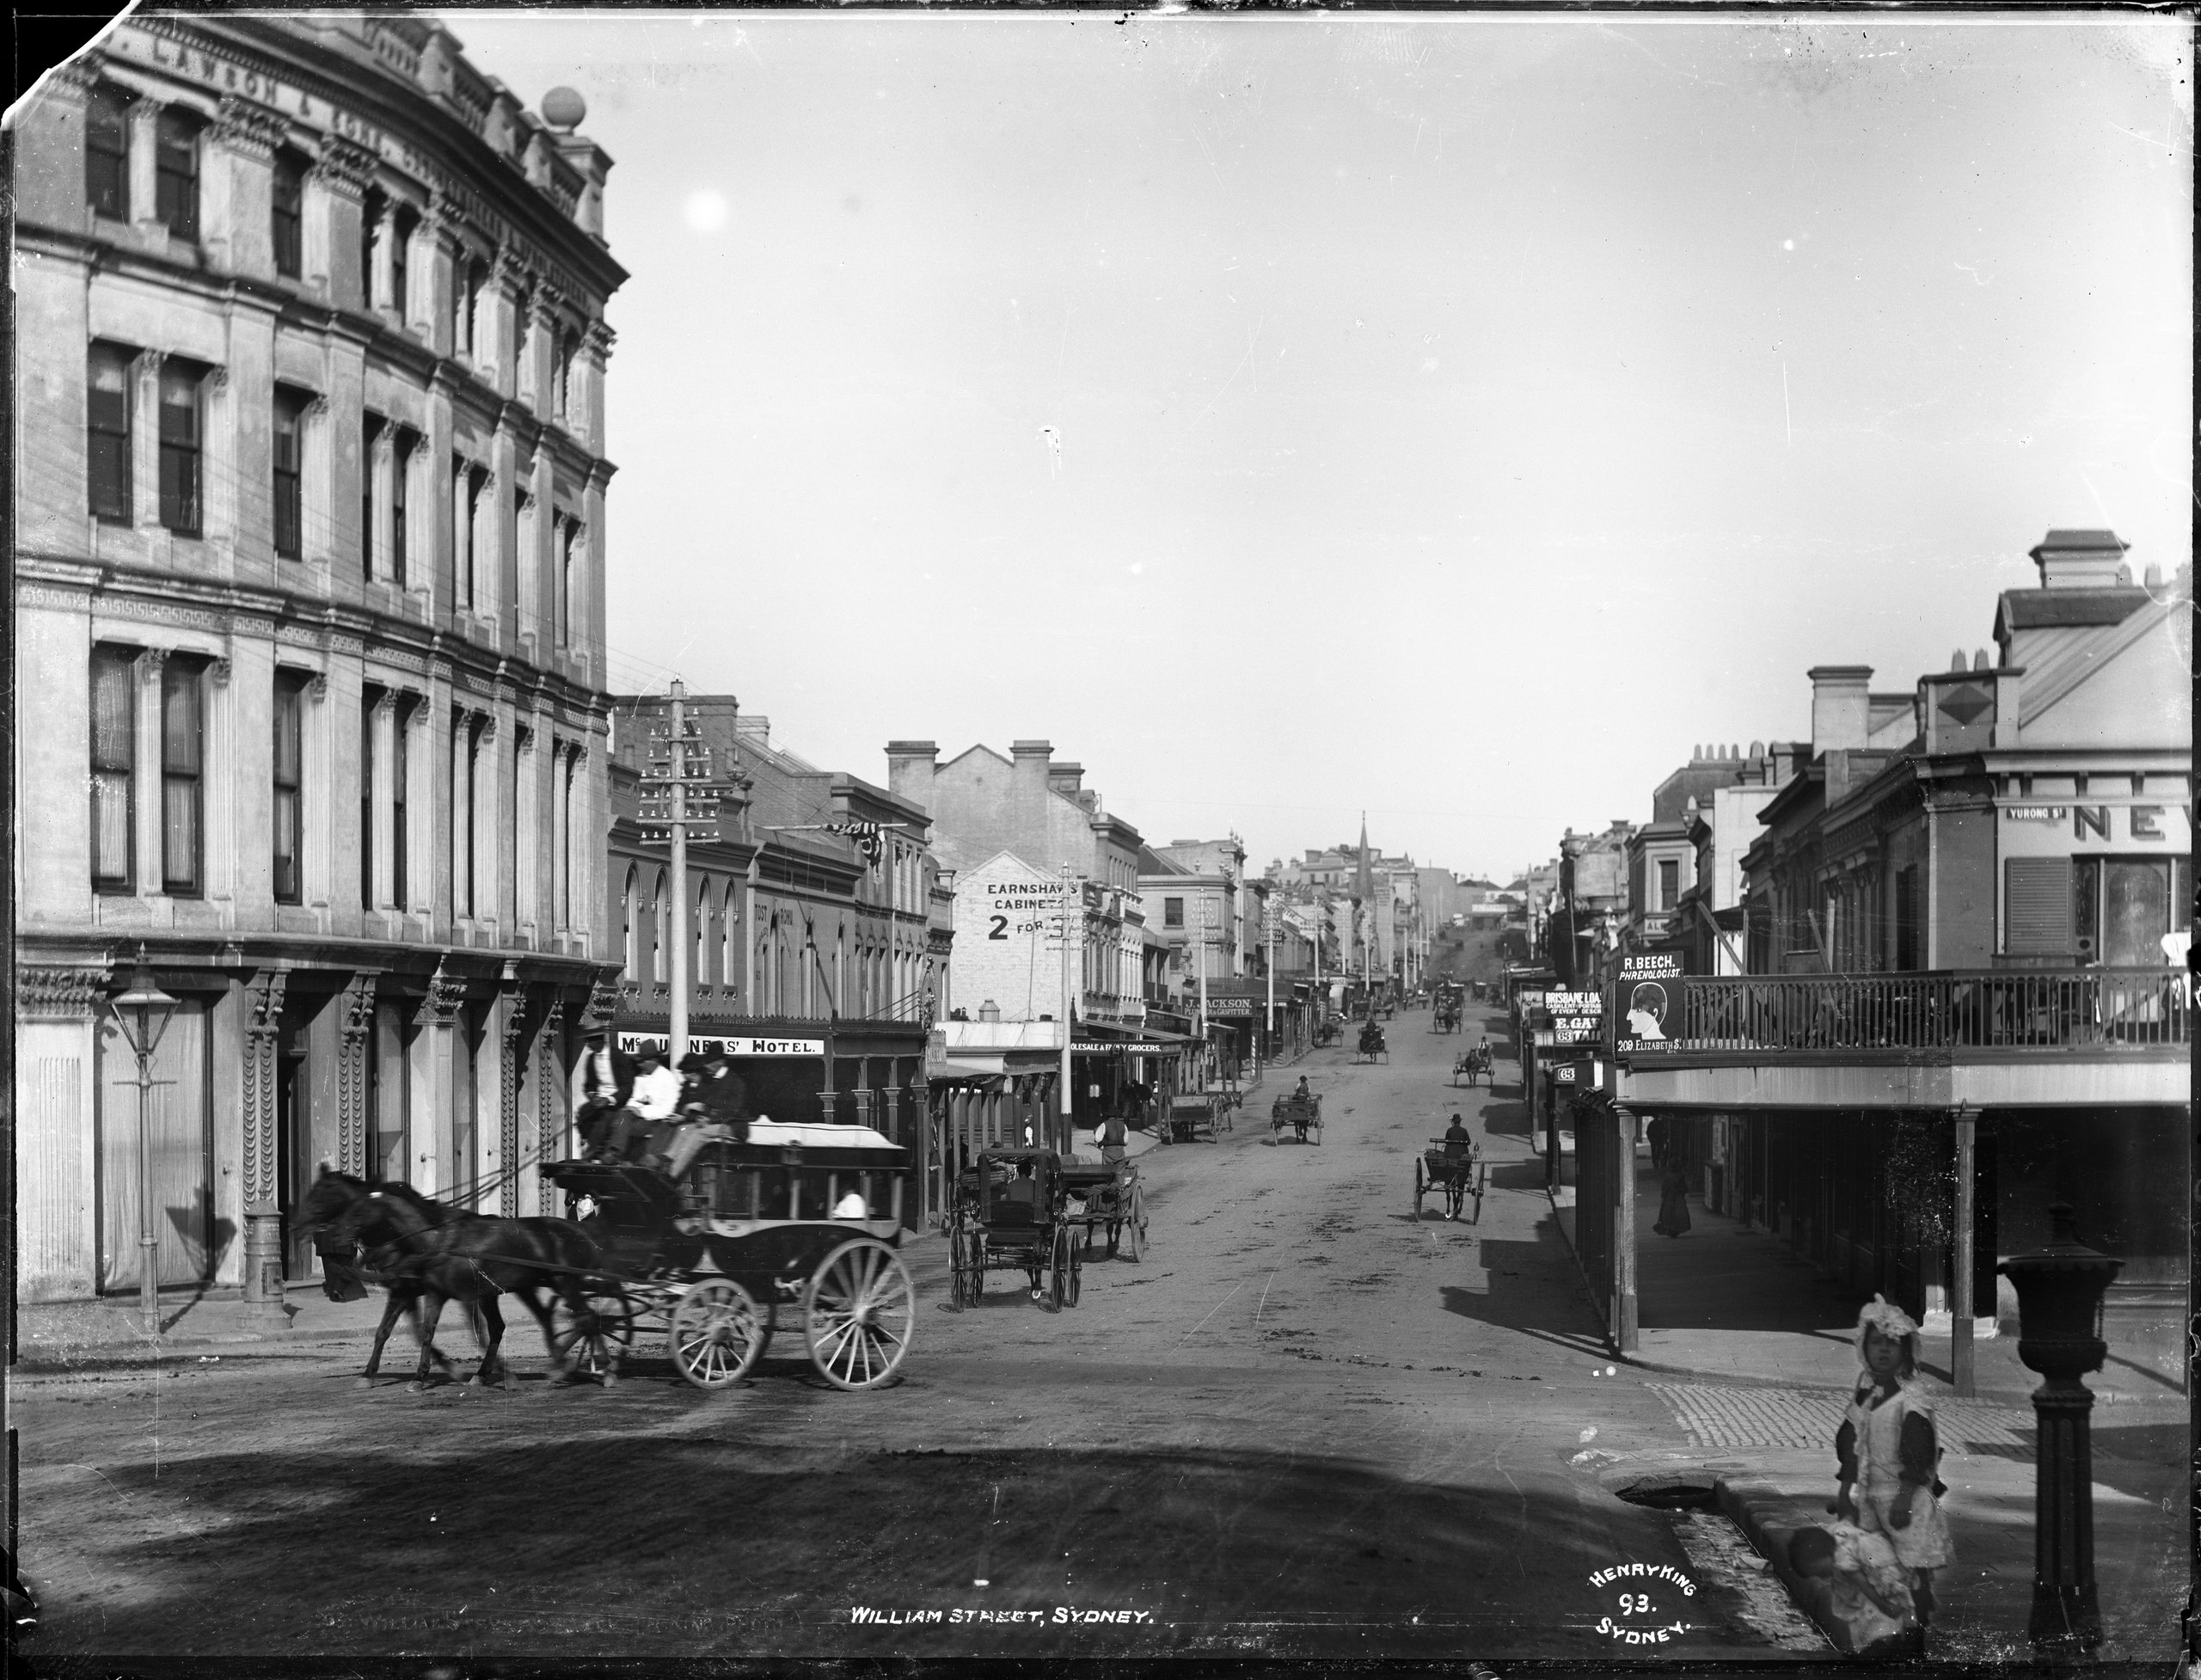 'William Street, Sydney' glass plate negative by Henry King from the Tyrrell collection